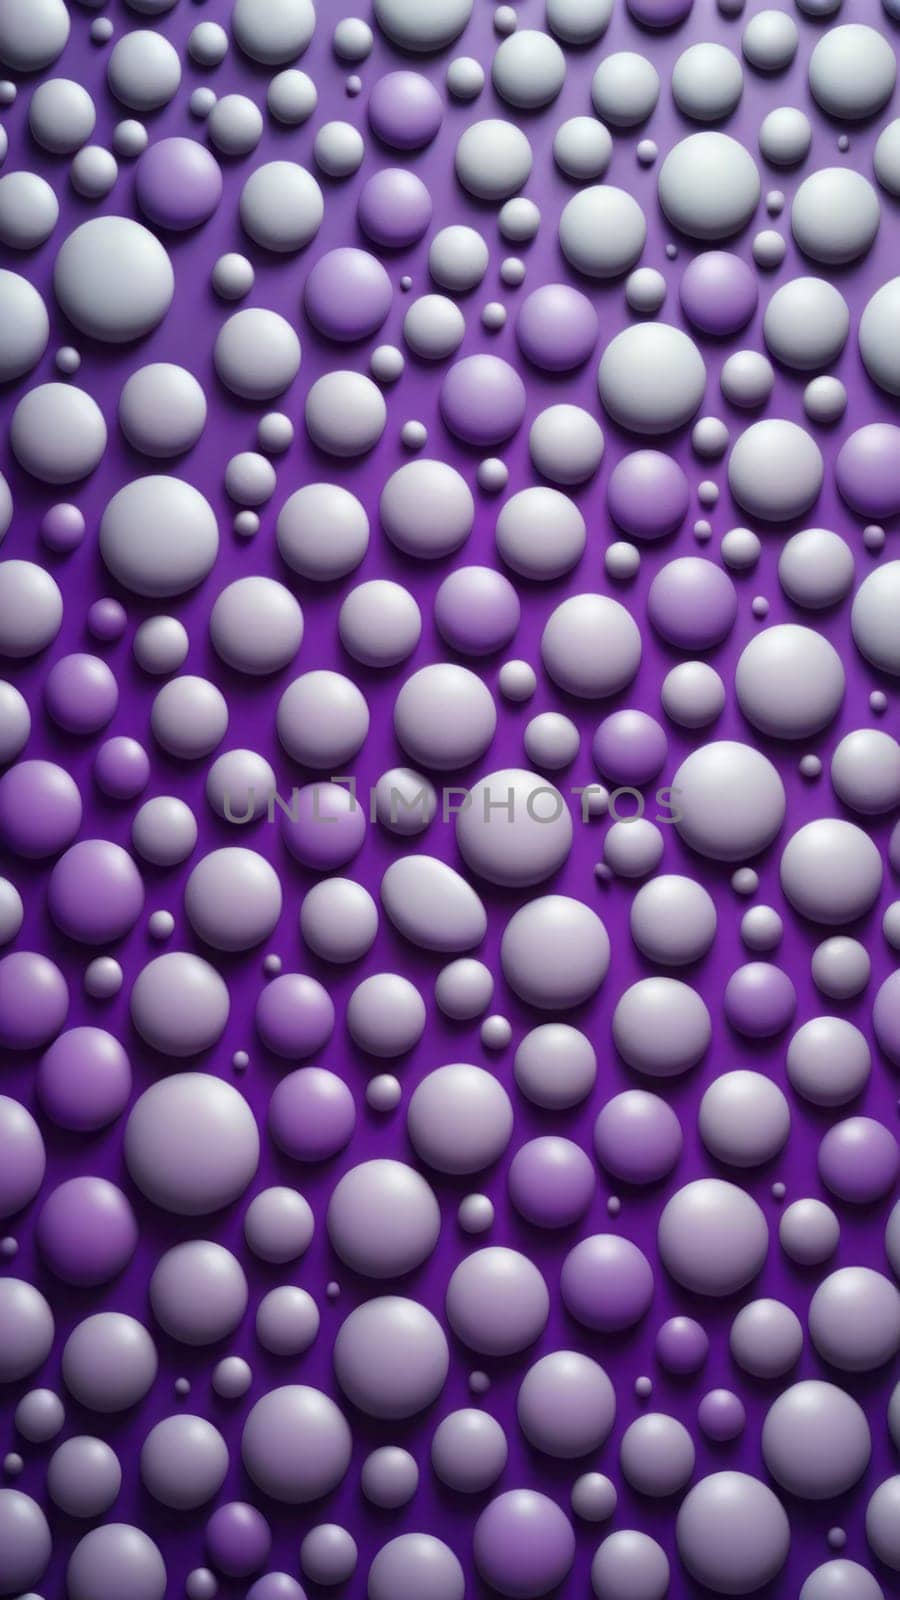 Screen background from Pebbled shapes and purple by nkotlyar